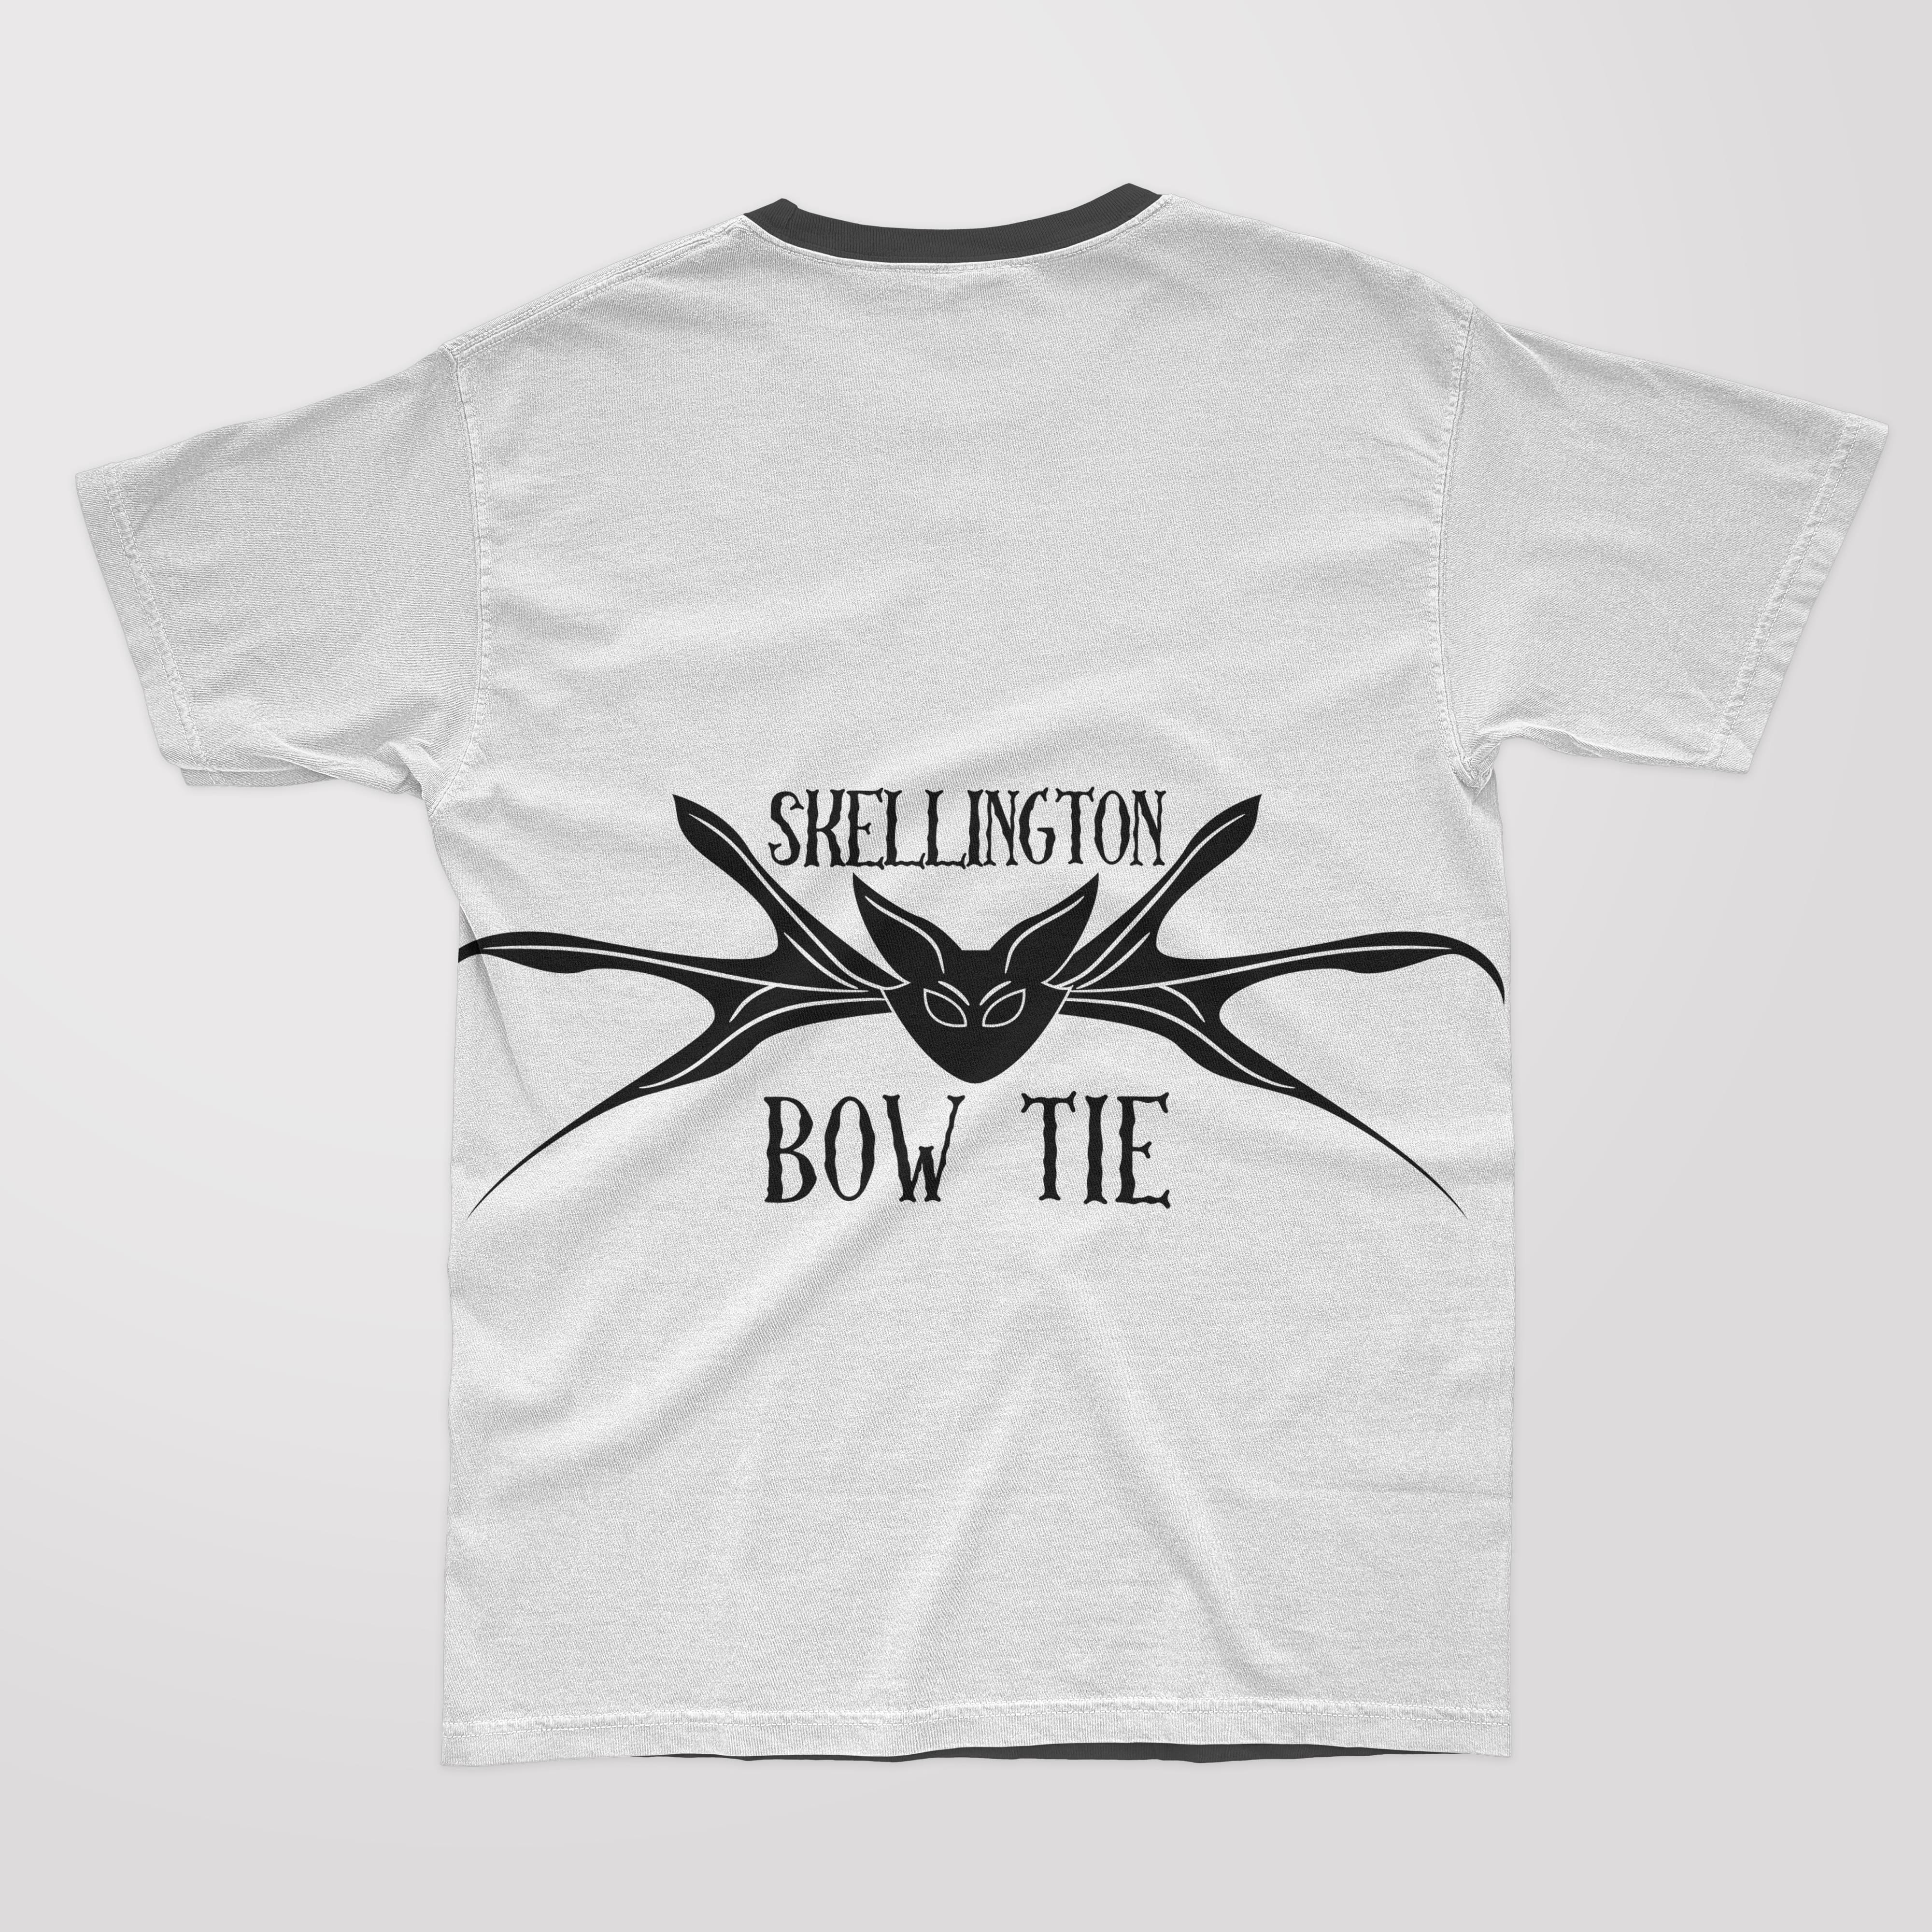 Black collar on the white t-shirt with black lettering "Skelling Bow Tie" and jack skellington bow tie design.